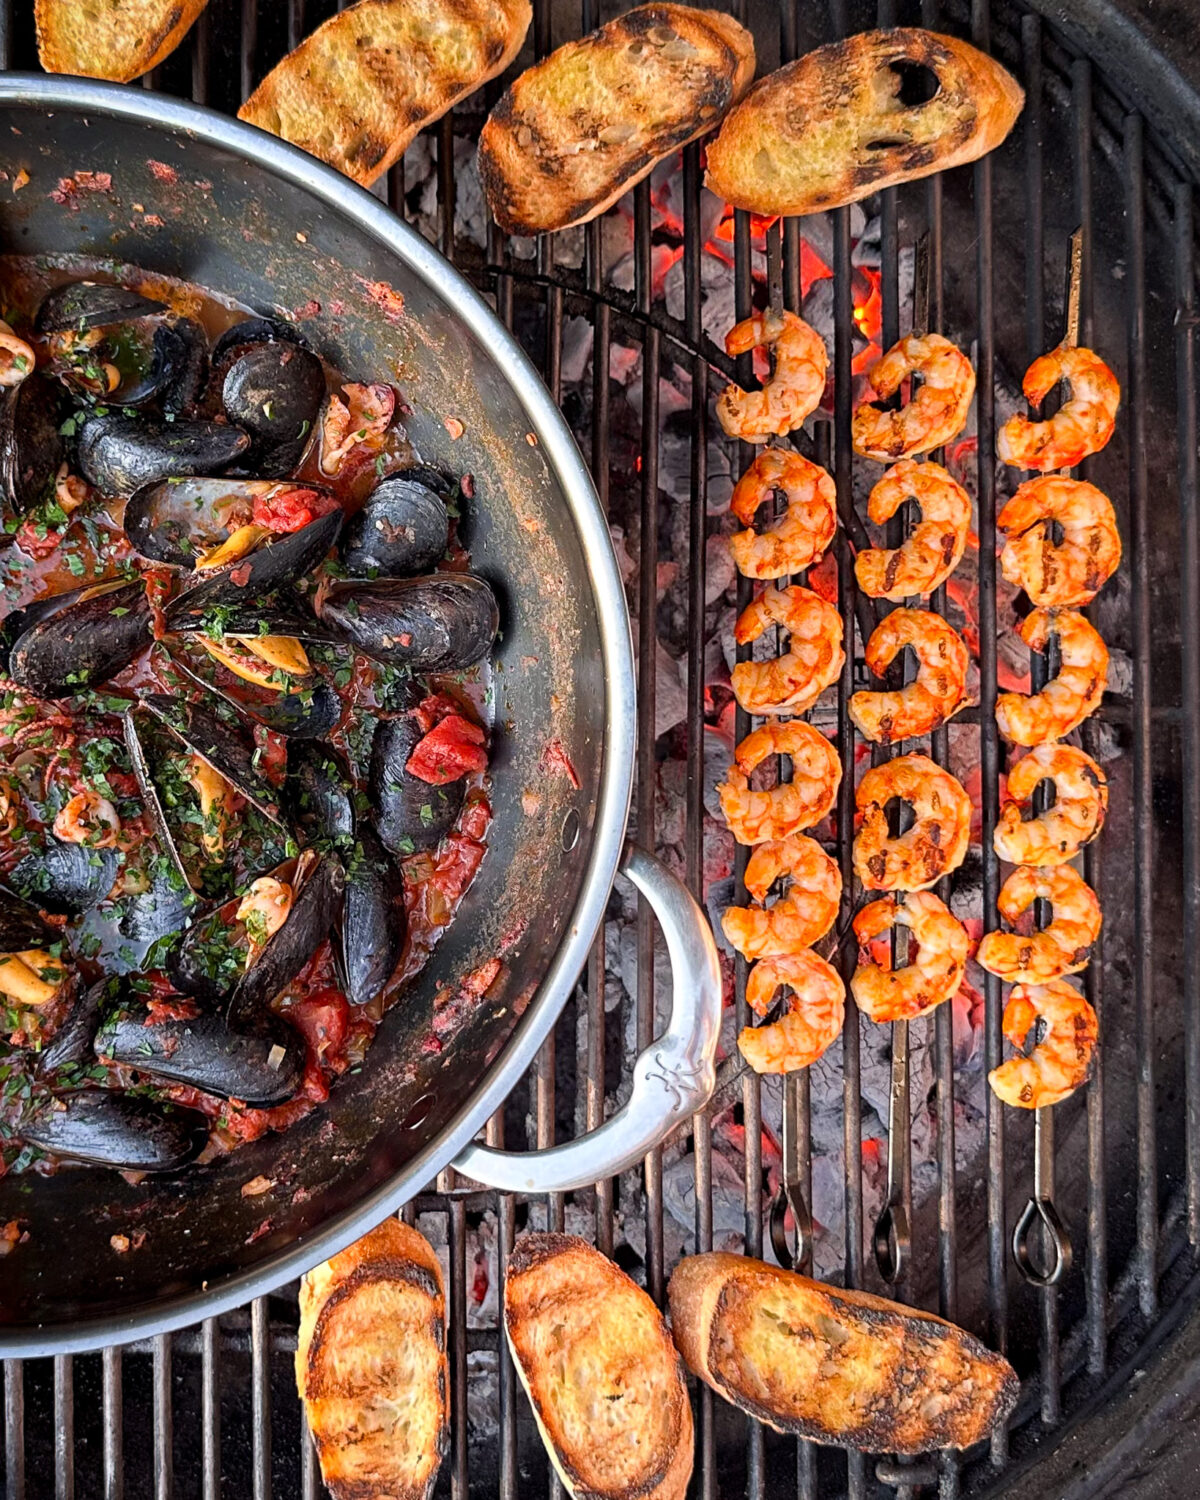 Sear the shrimp skewers over the hot coals for 2 minutes per side then add them to the wok.